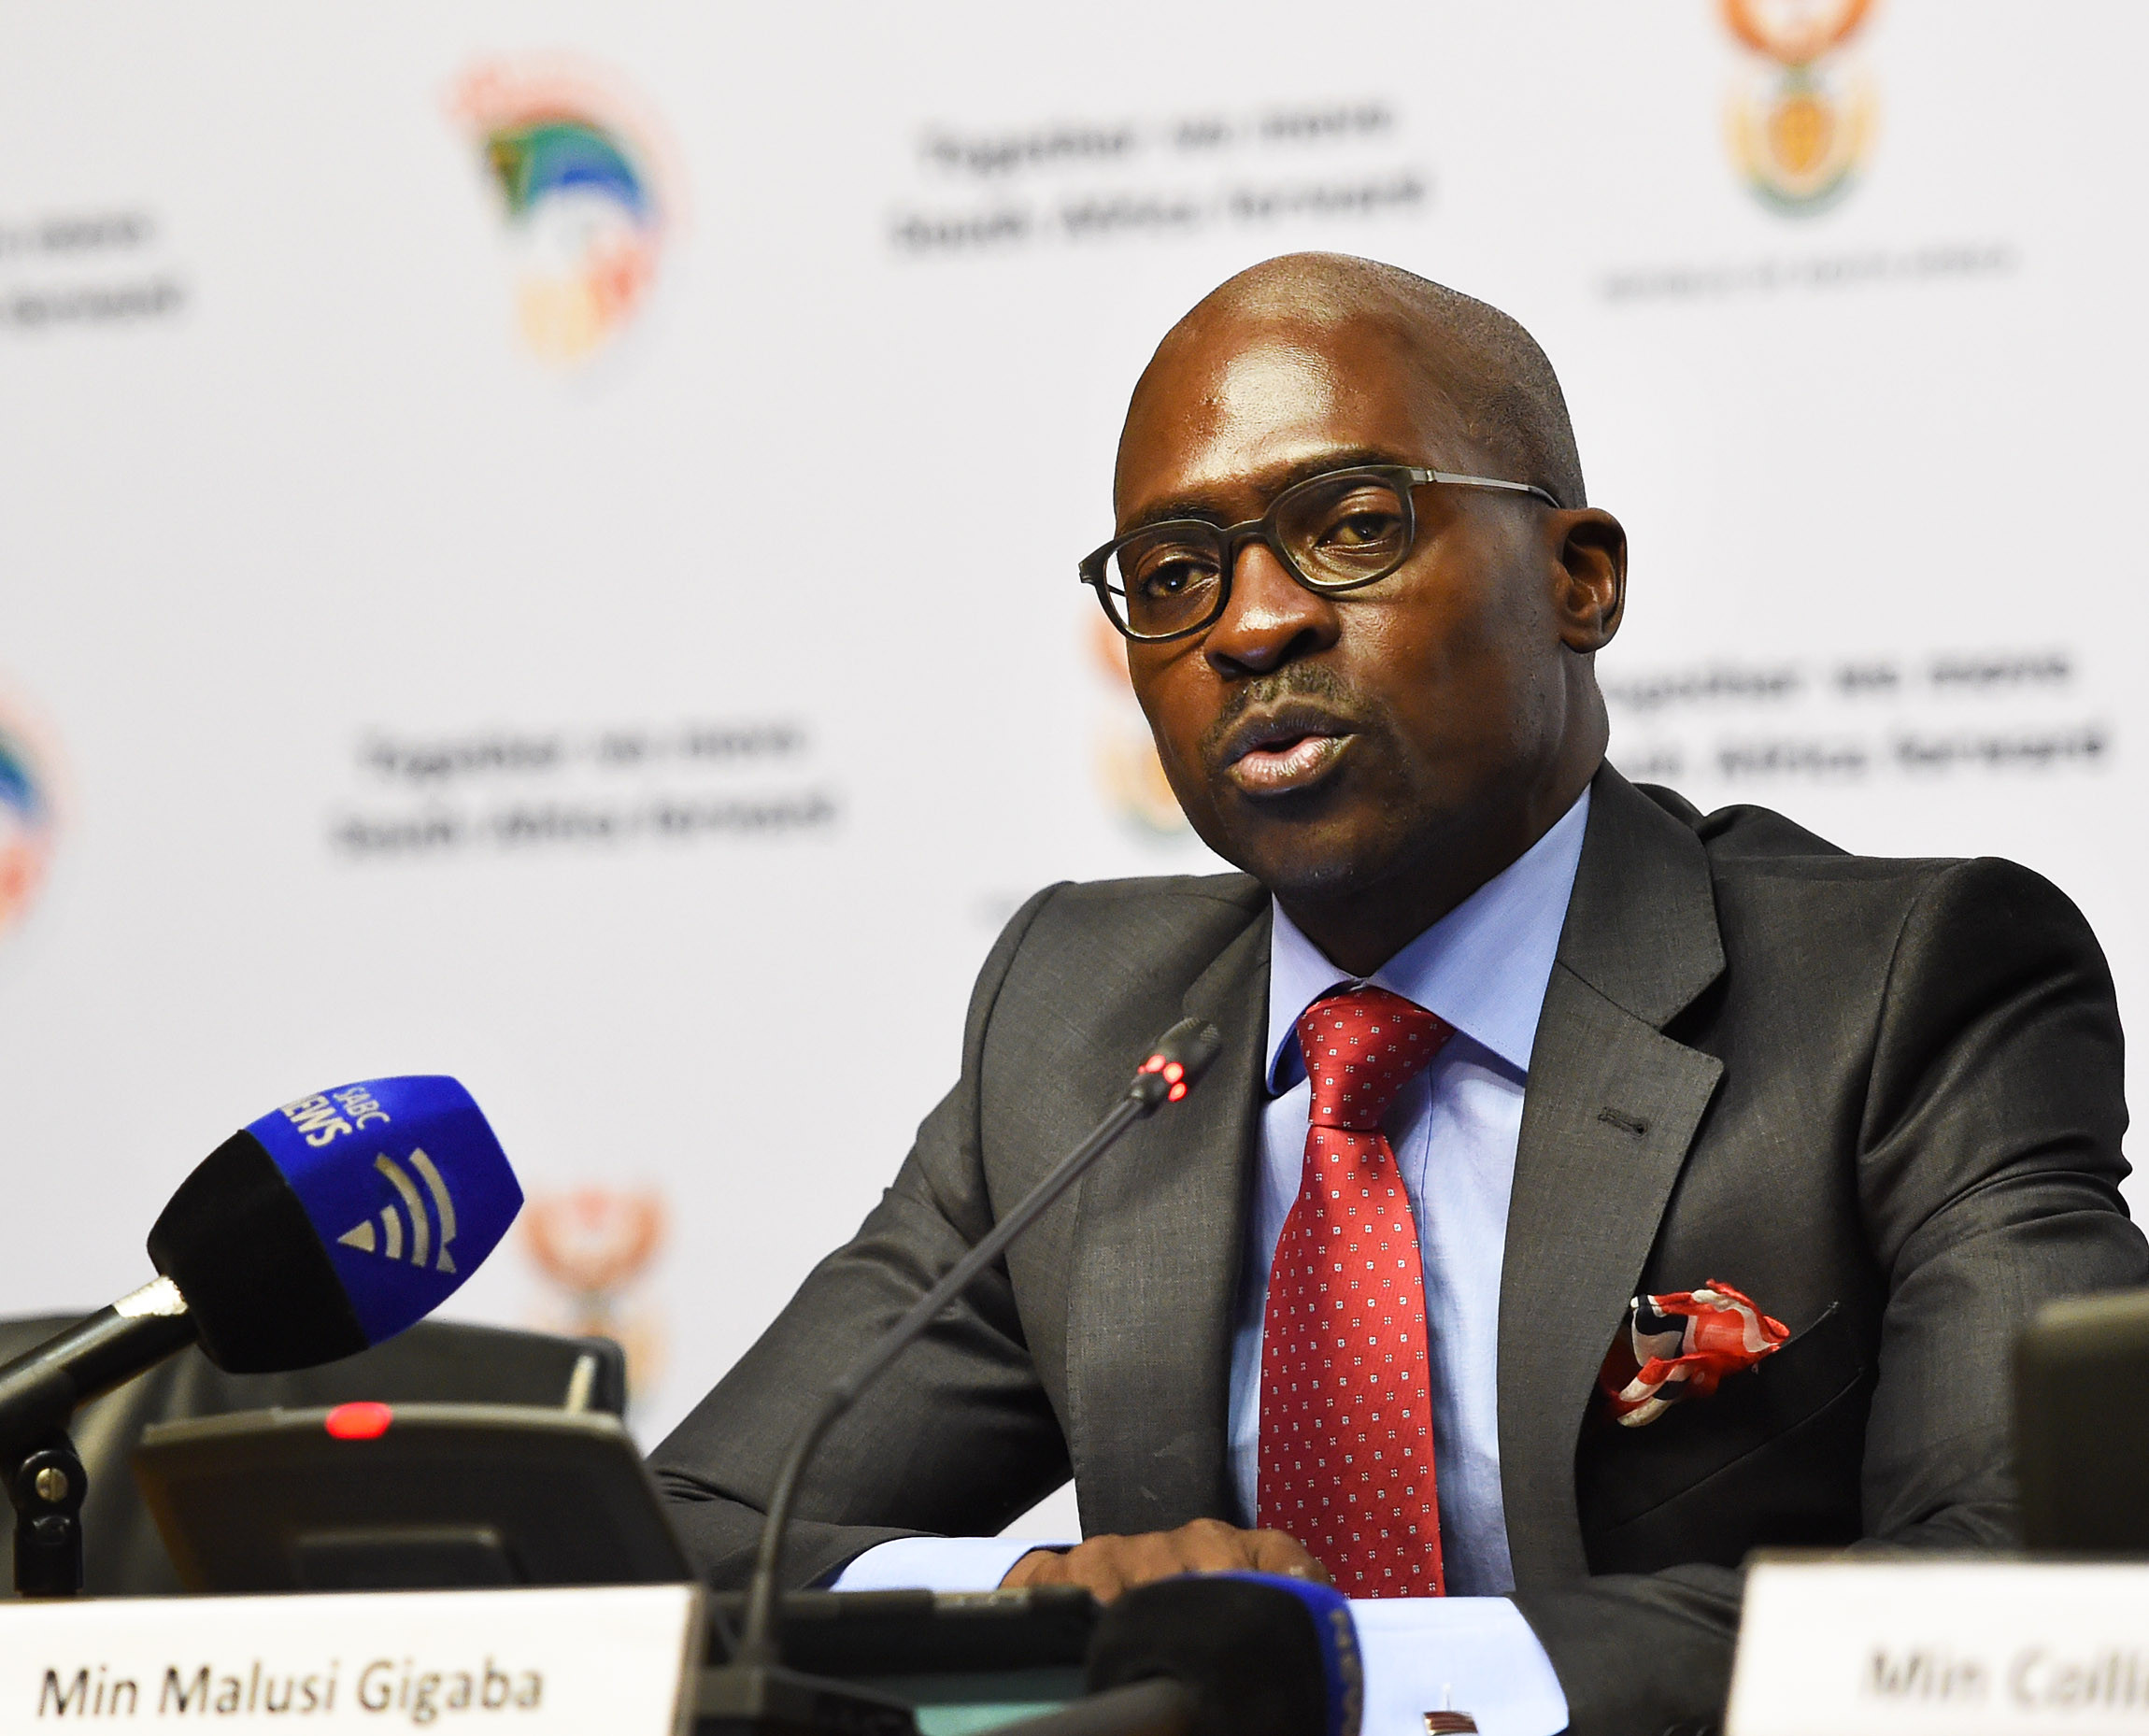 The 44-year-old Malusi Gigaba, minister of public enterprise and now, minister of home affairs, under Jacob Zuma, has been tagged as a rising ANC star.